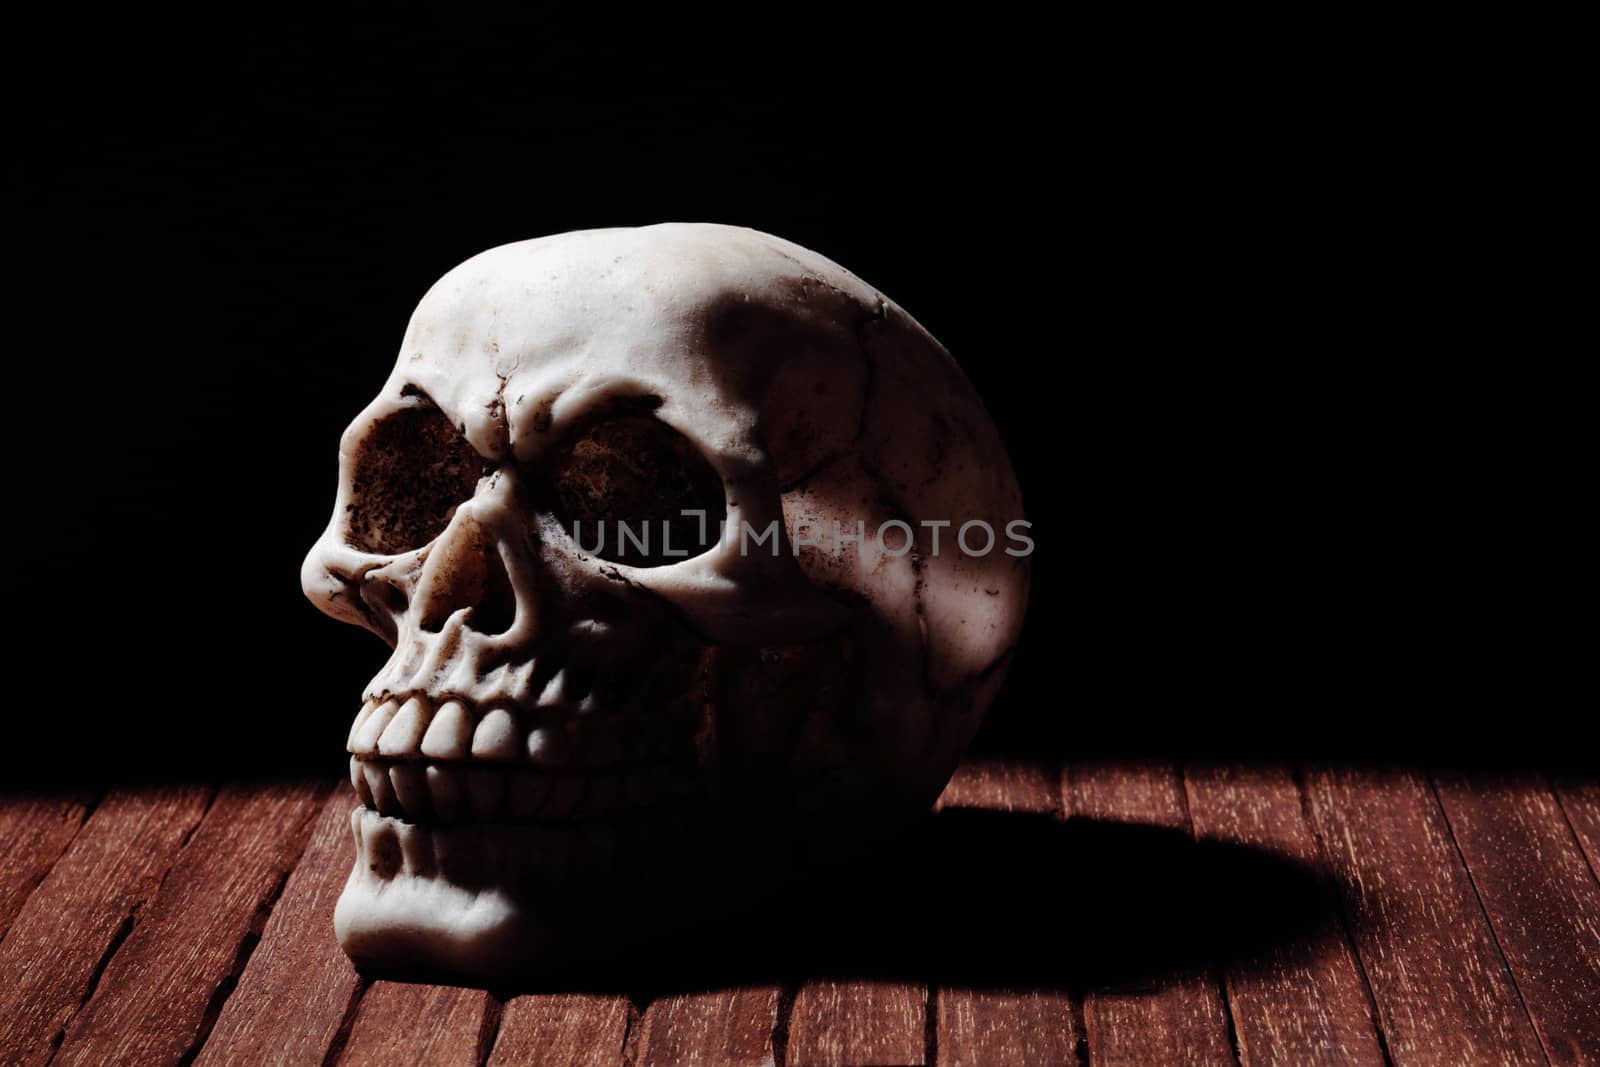 a human skull on a wooden floor and a black background